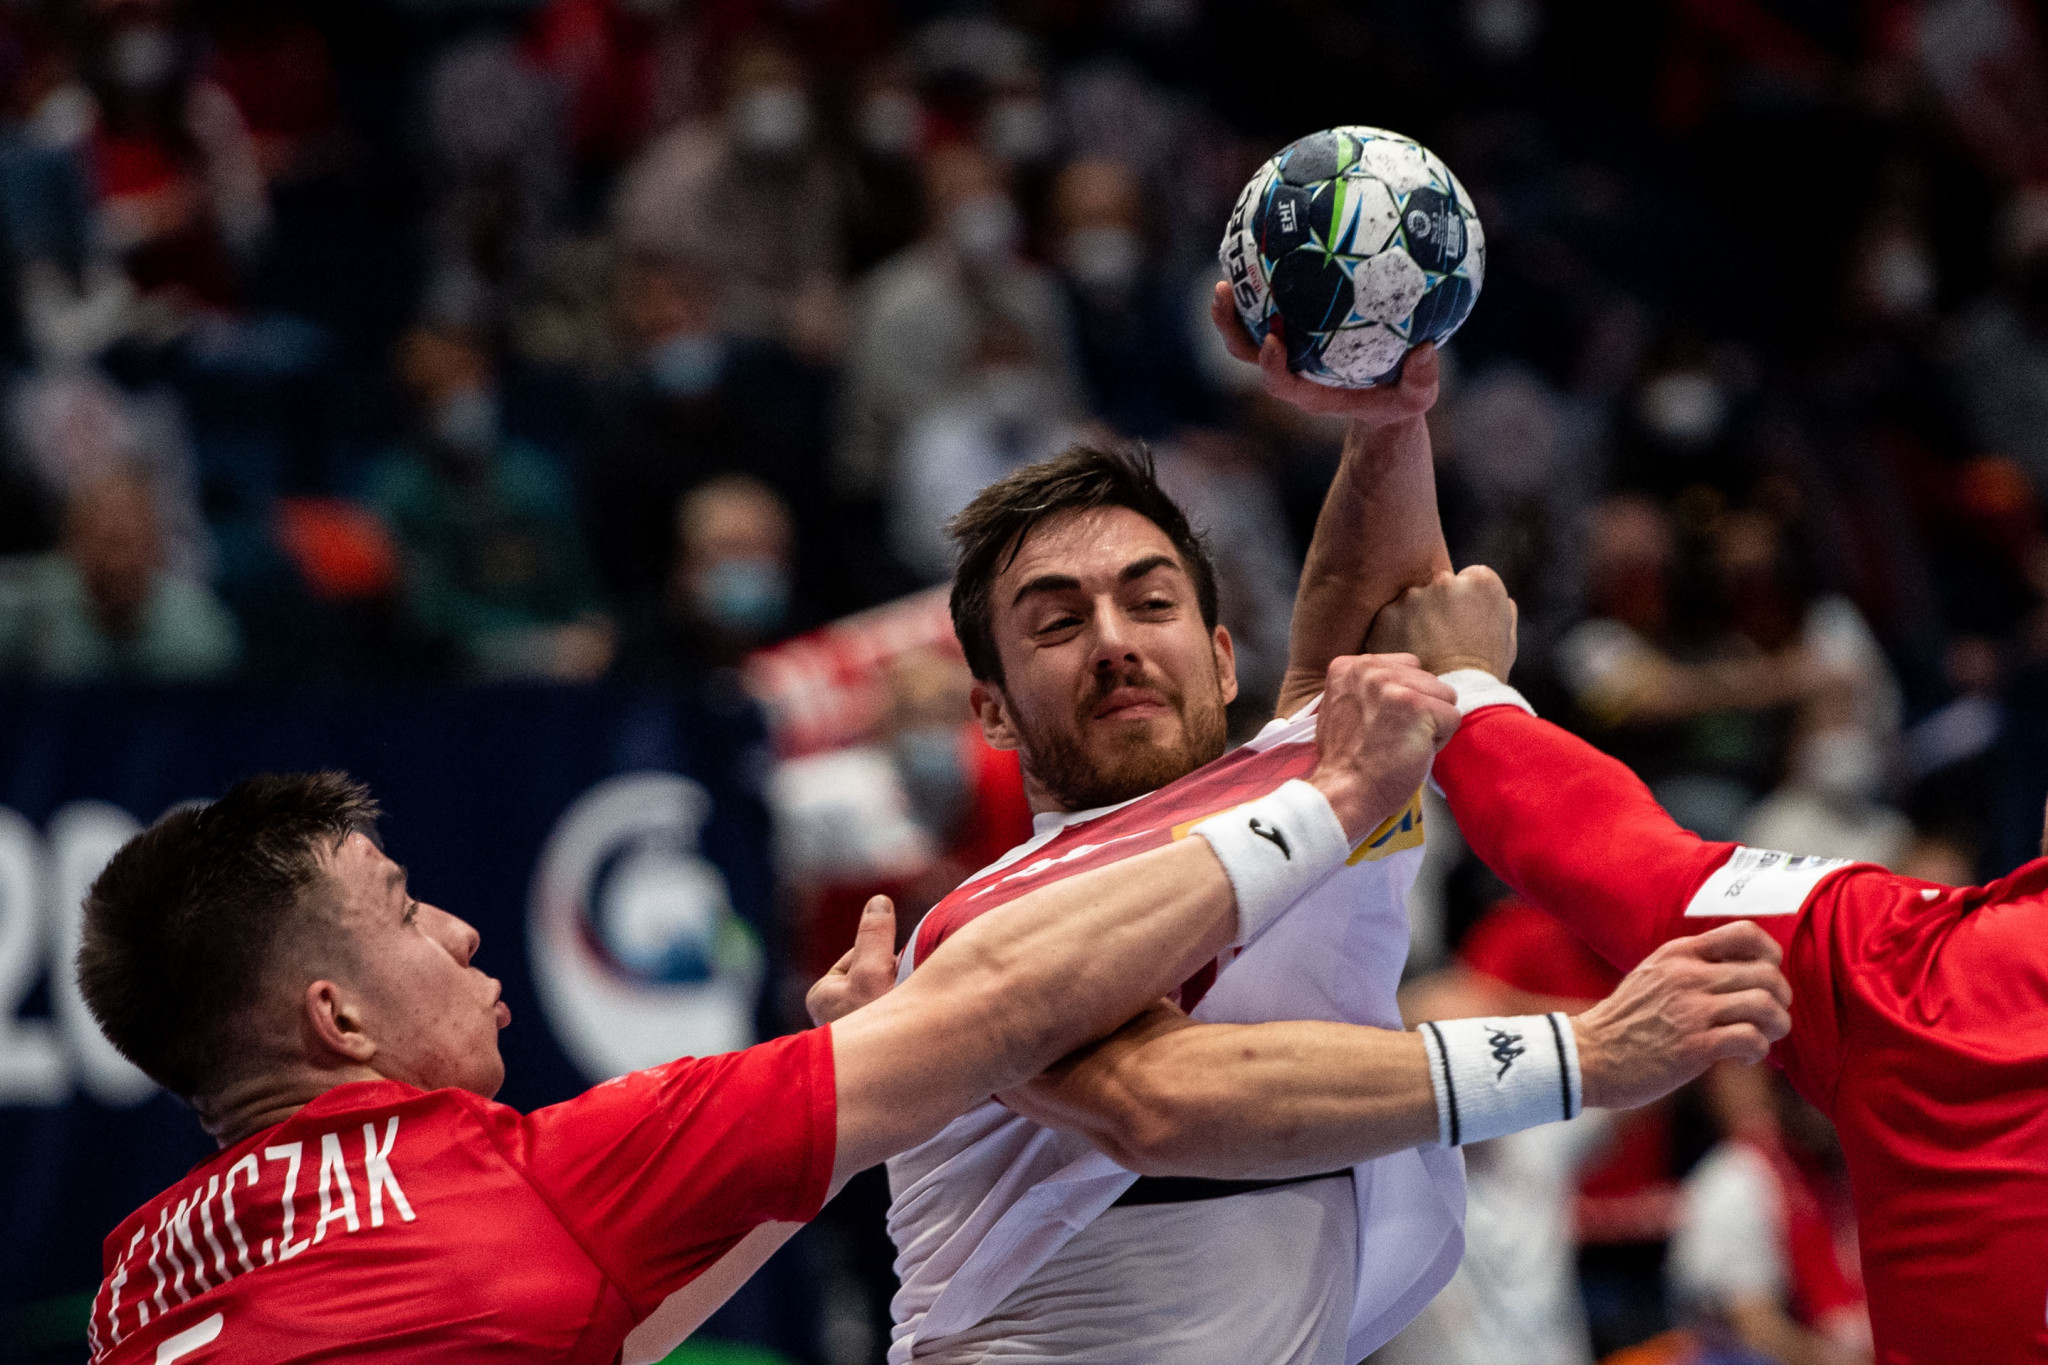 Iceland, Germany and Poland win on second day of preliminary-round action at Men's European Handball Championship